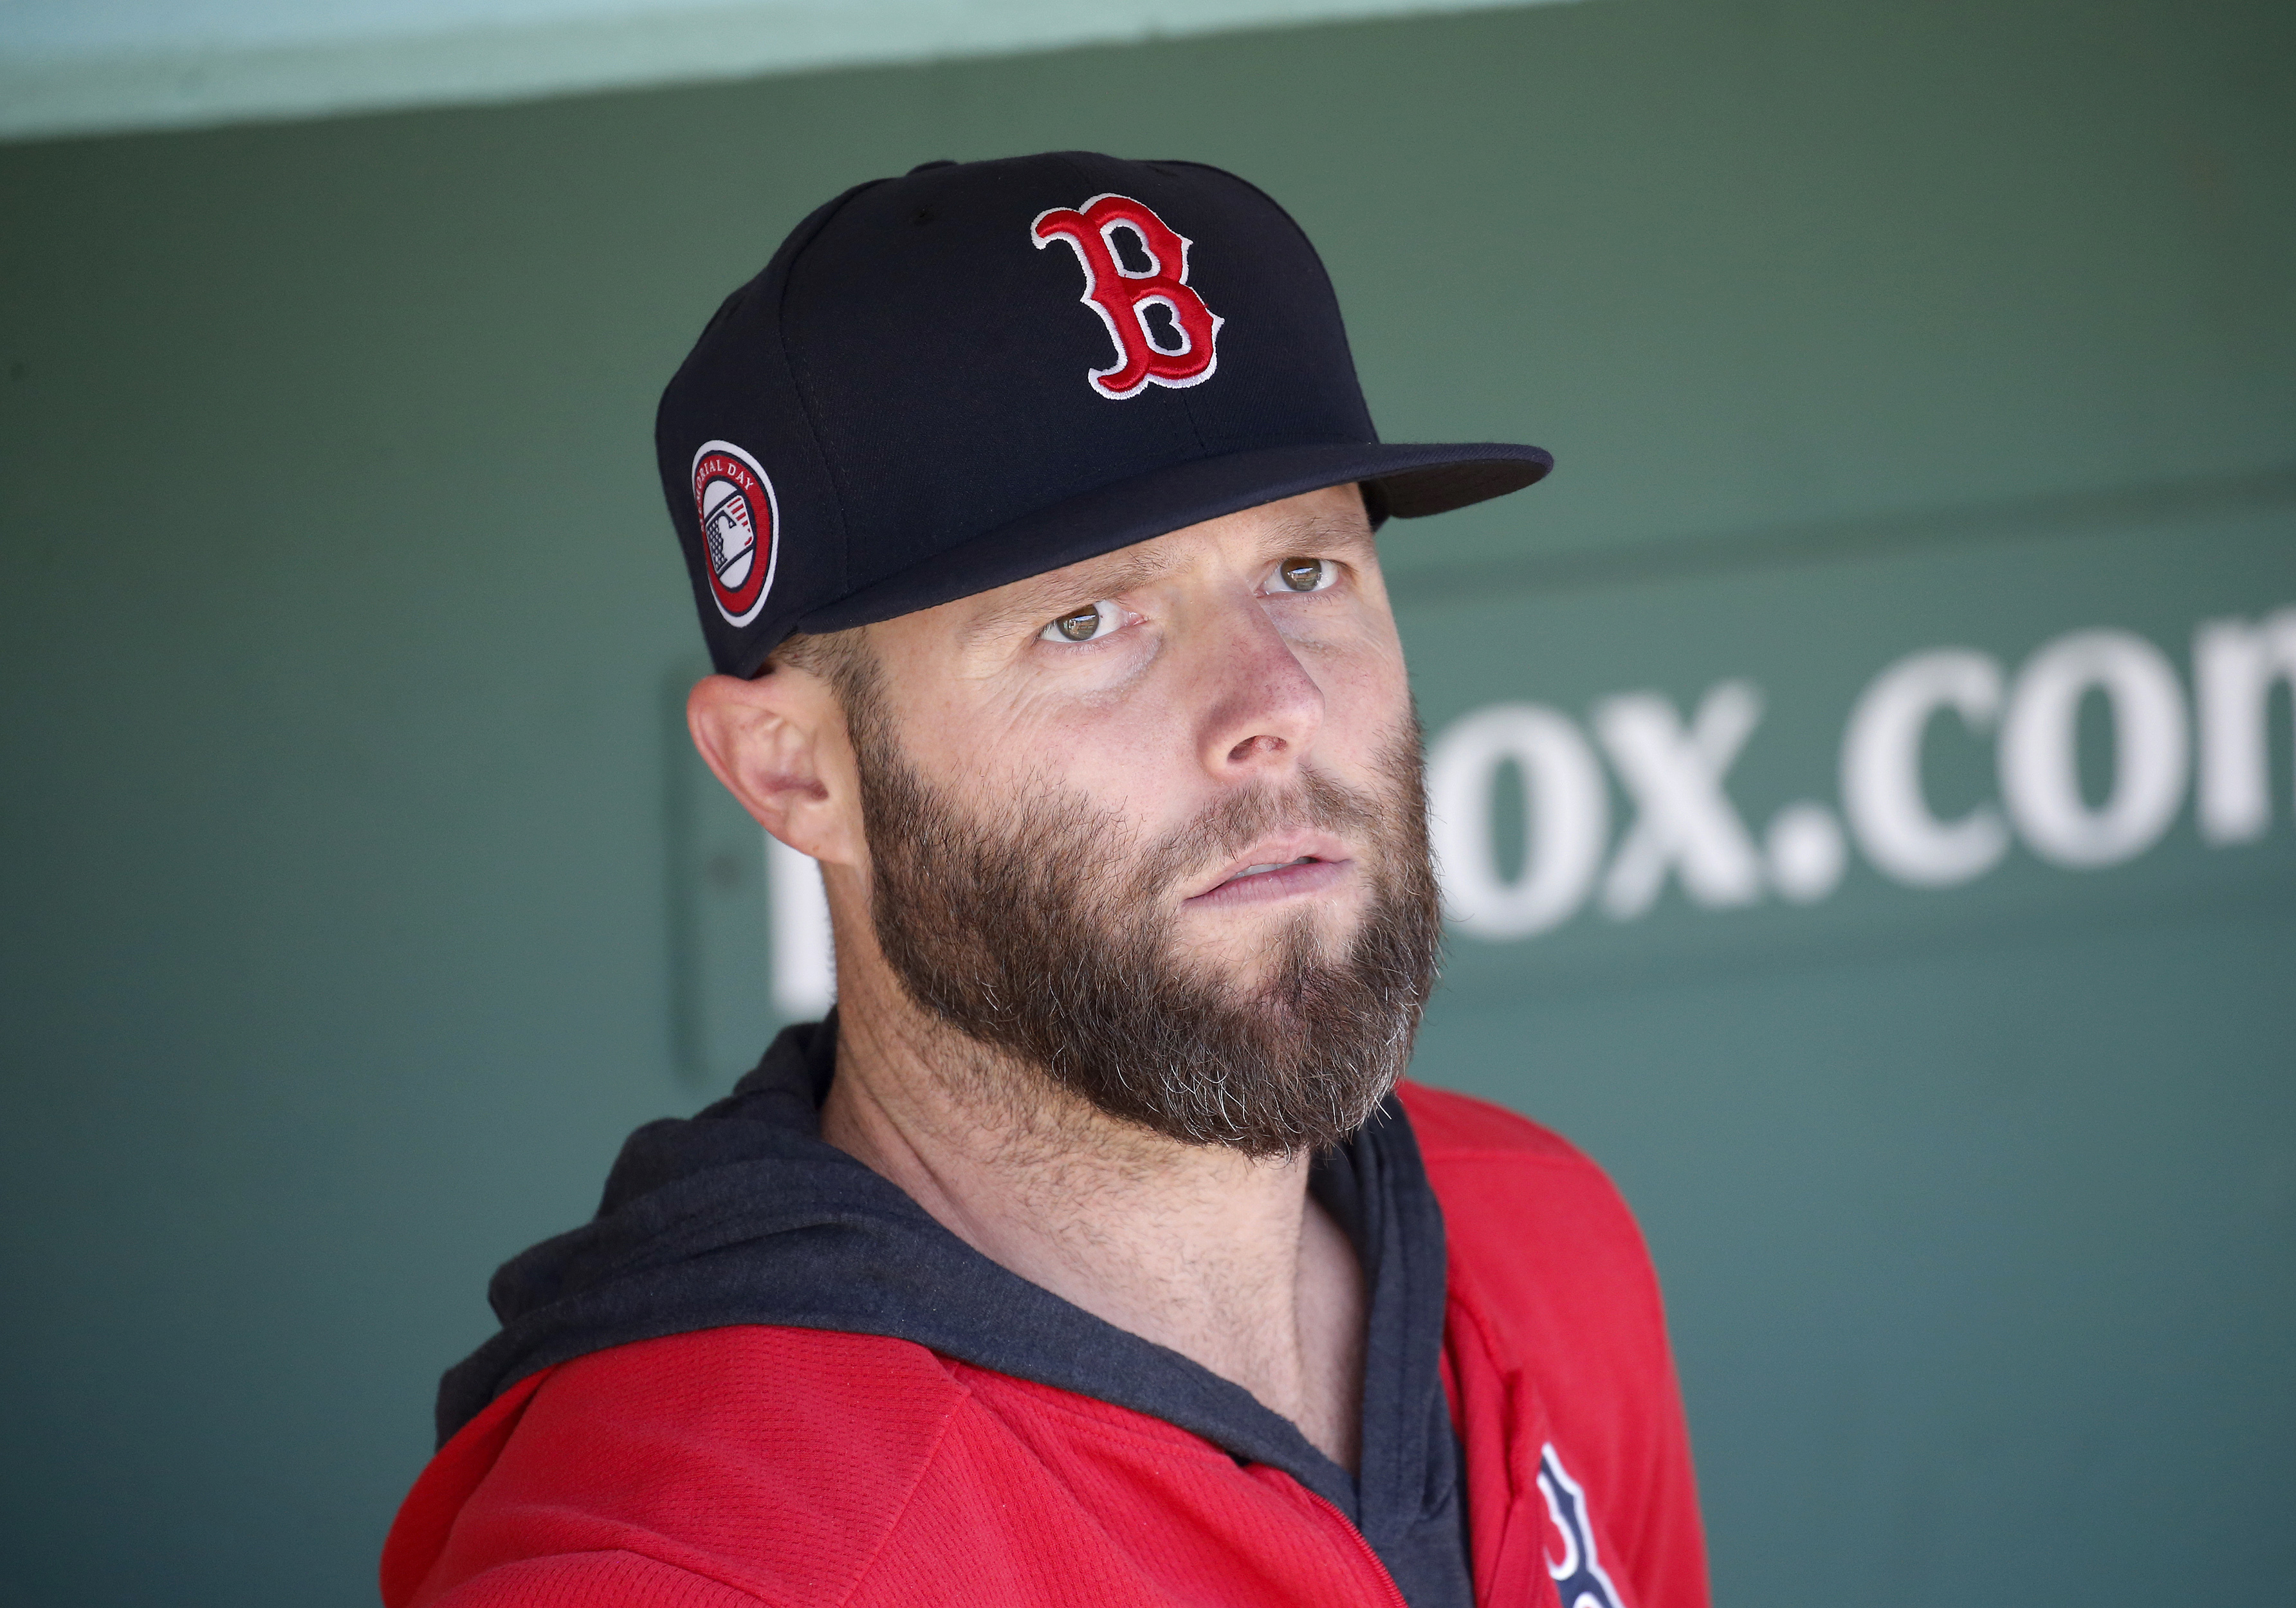 Pedroia making sacrifices to keep playing second base